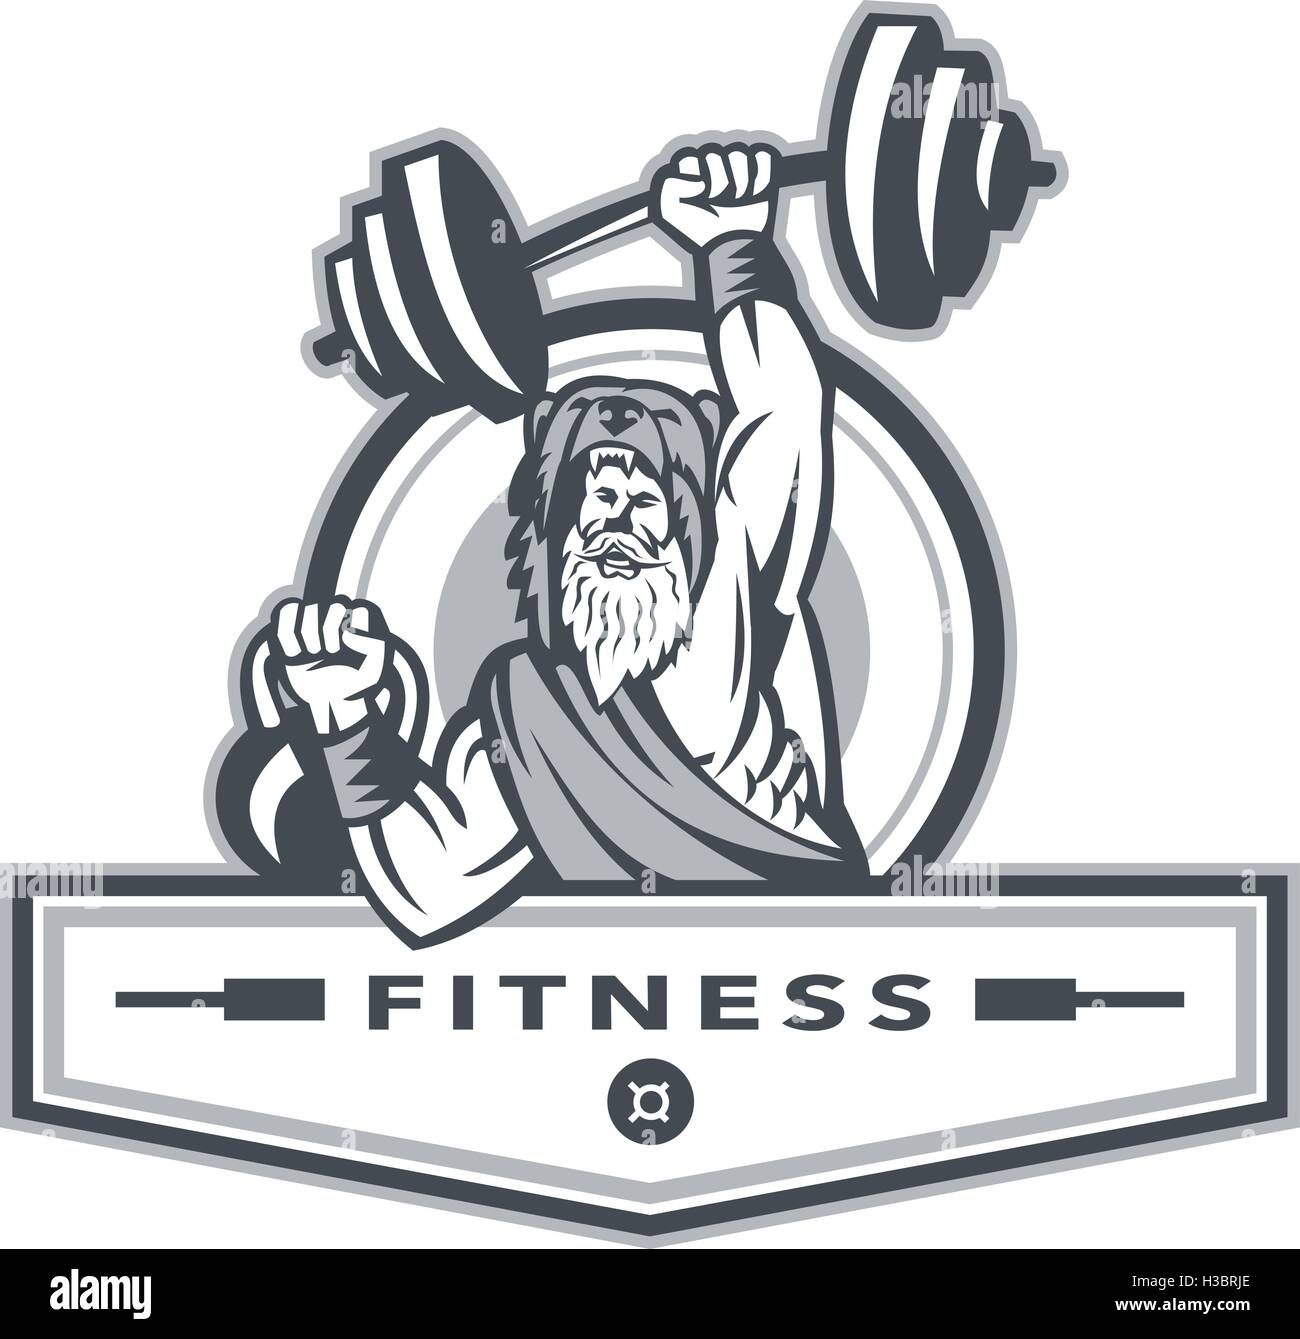 Illustration of a berserker, a champion Norse warrior wearing pelt of bear skin lifting barbell and kettlebell viewed from front set inside circle with the word text Fitness inside banner done in retro style. Stock Vector